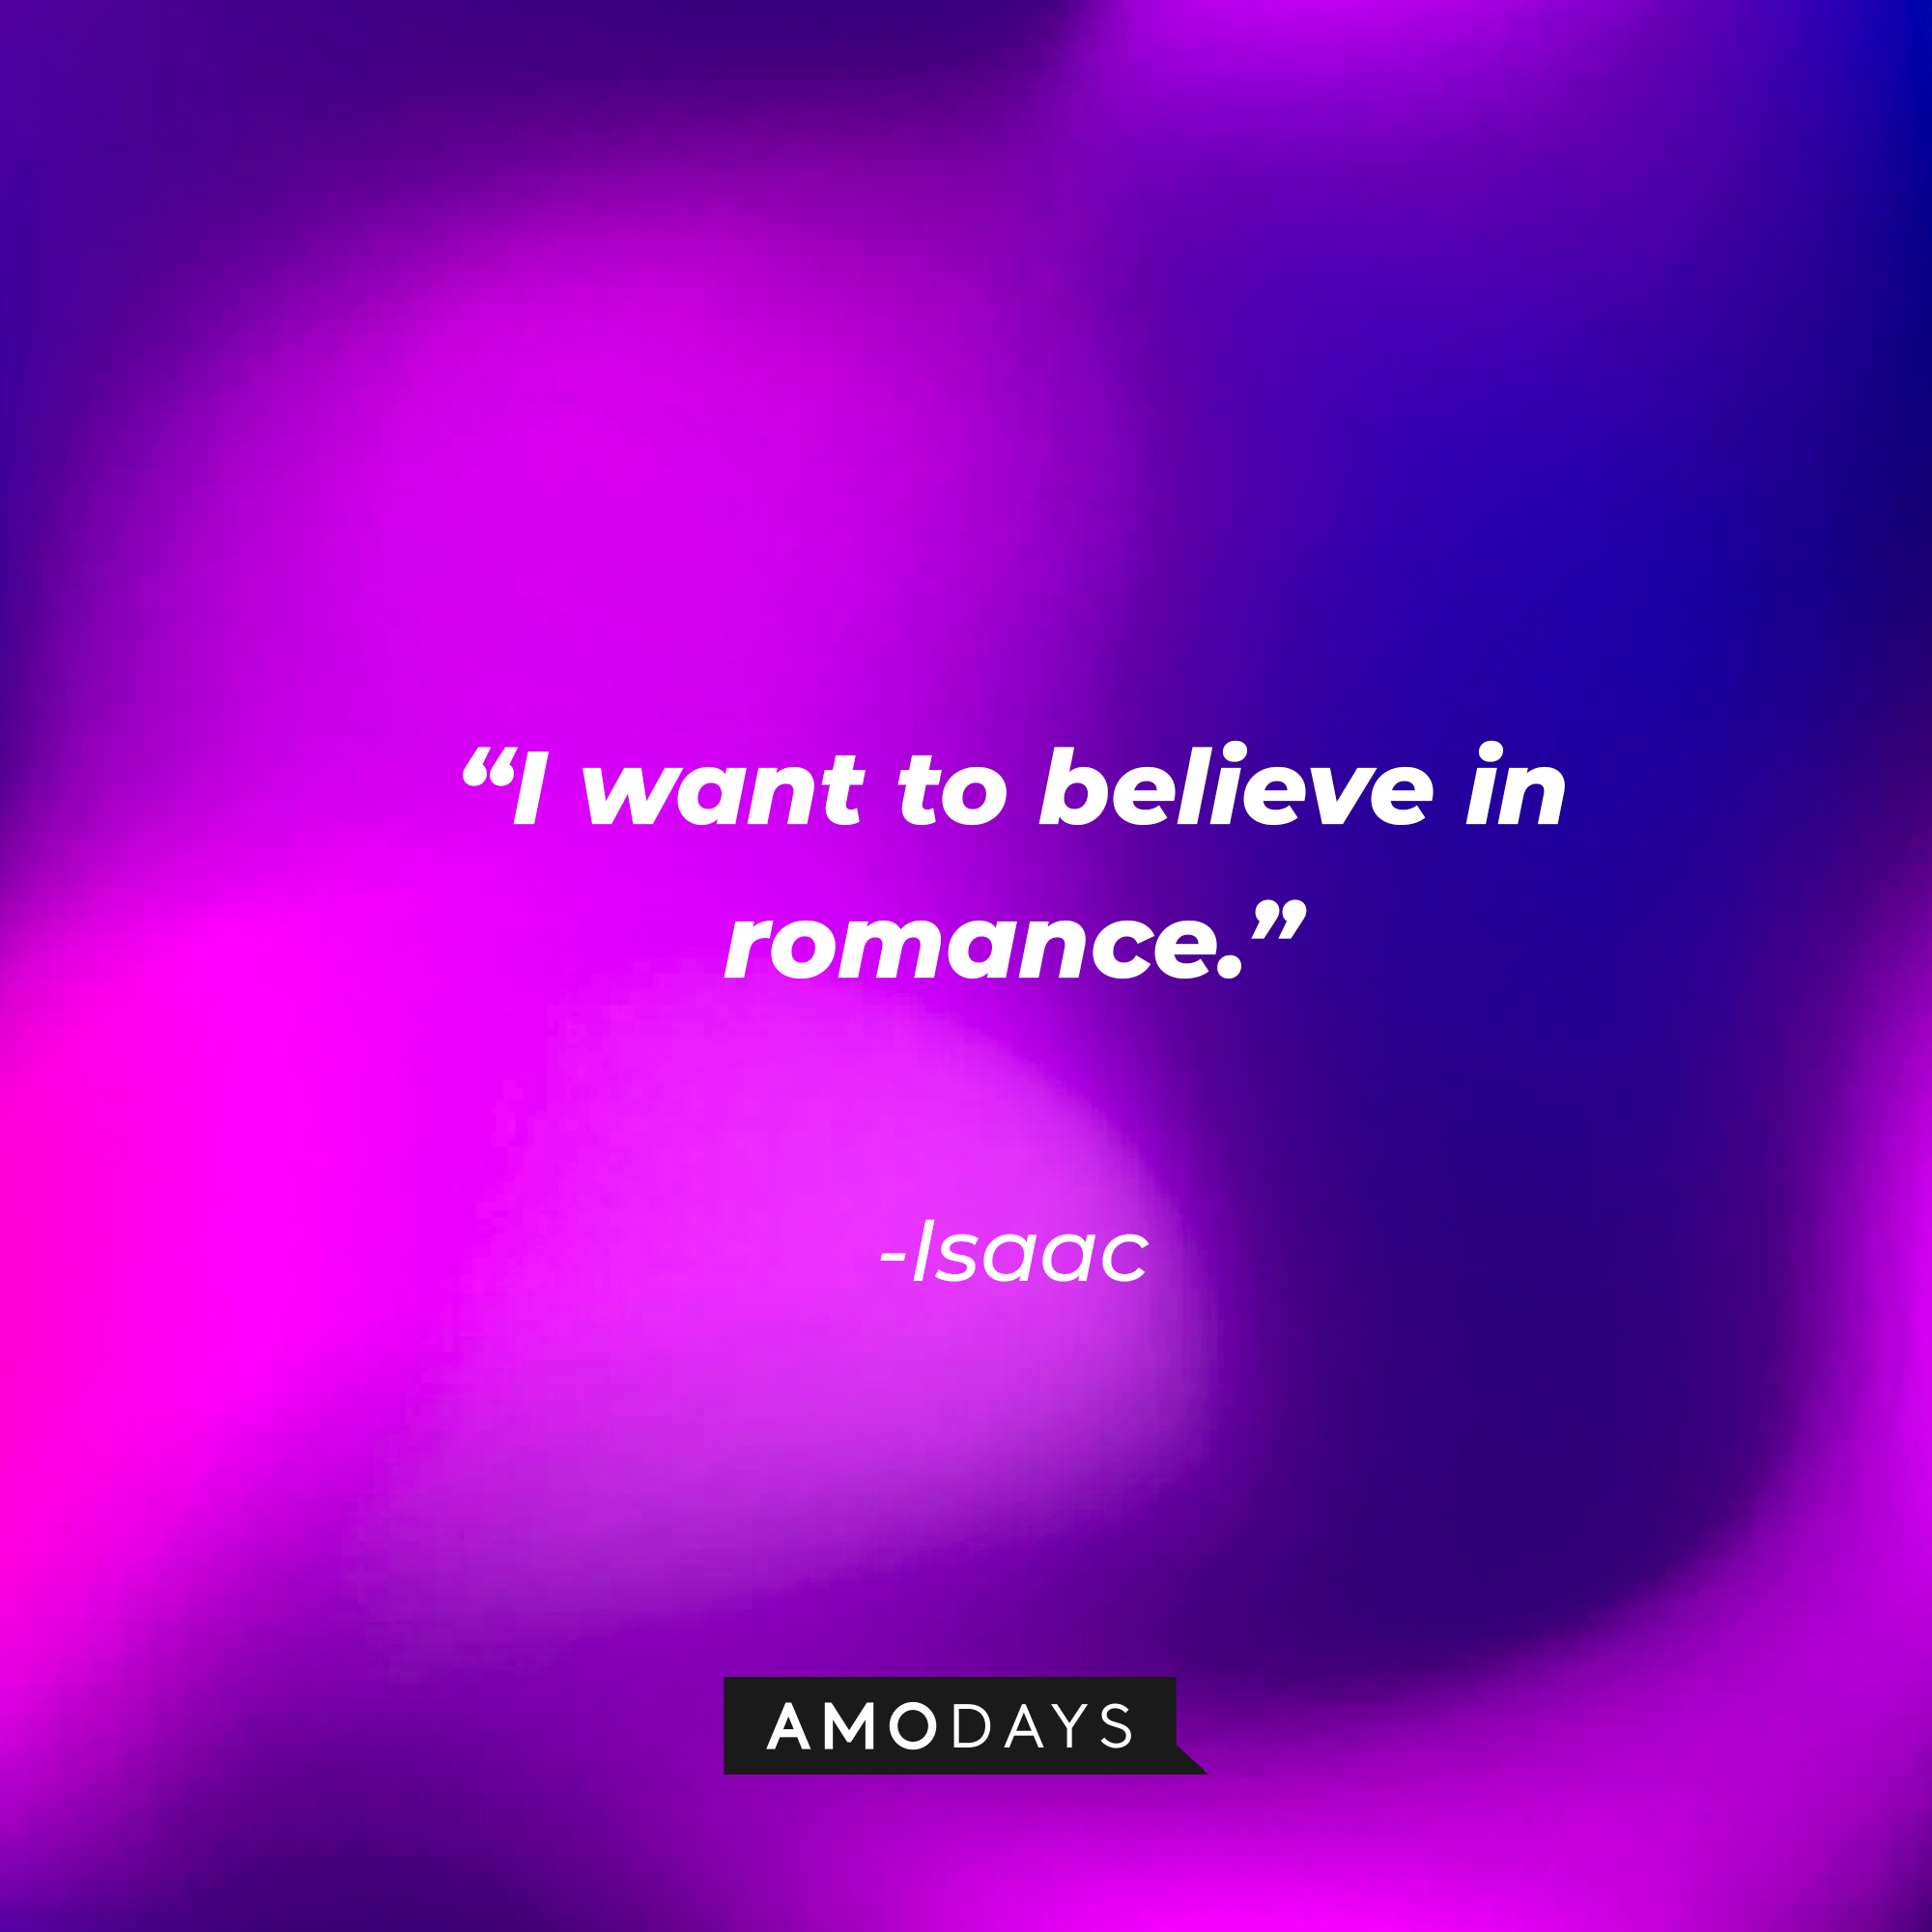 Isaac’s quote: “I want to believe in romance.” | Source: AmoDays